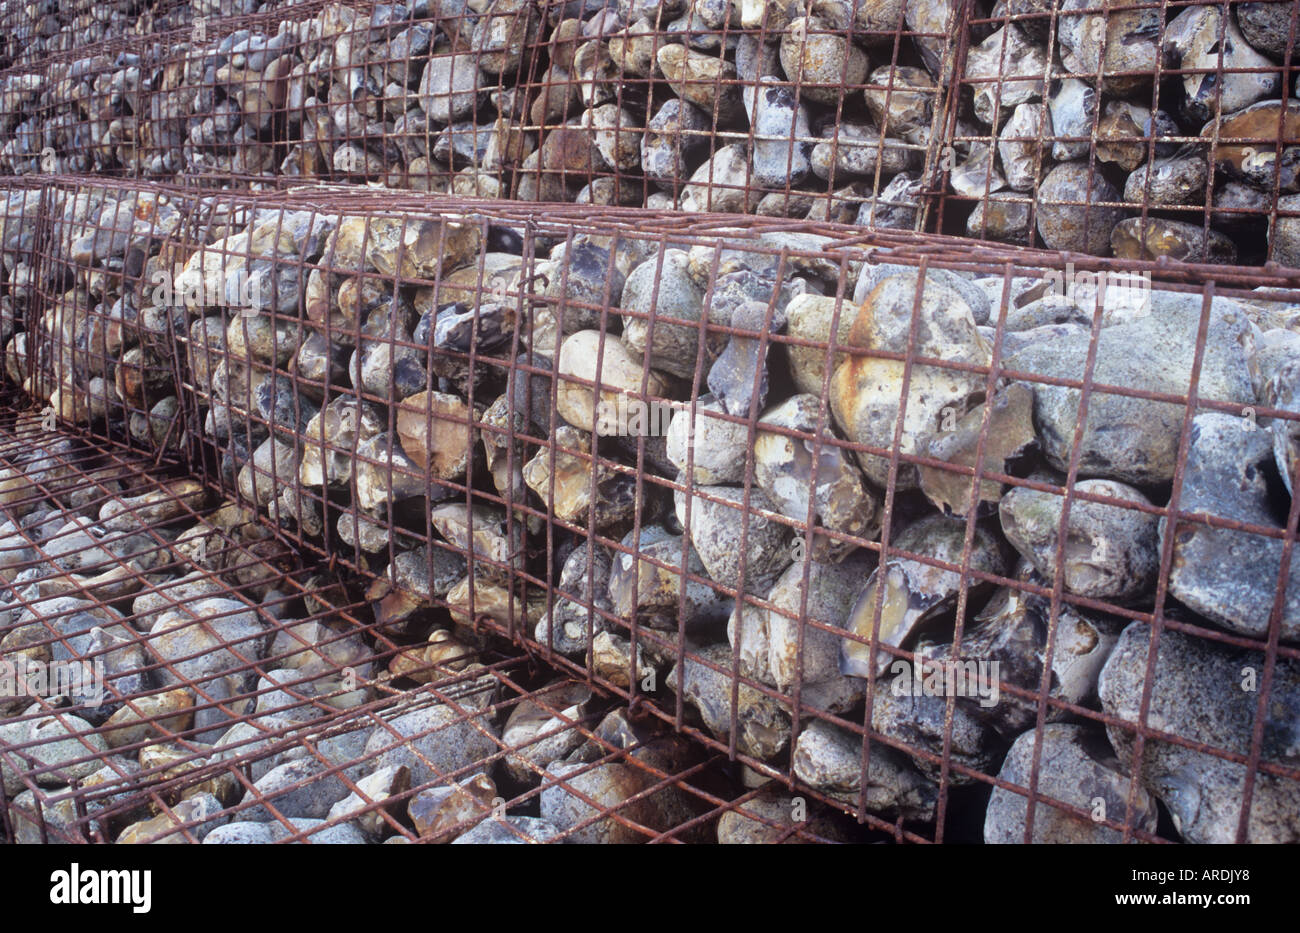 Detail of wire cages or gabions containing large stones stacked and stepped as defence against coastal erosion Stock Photo